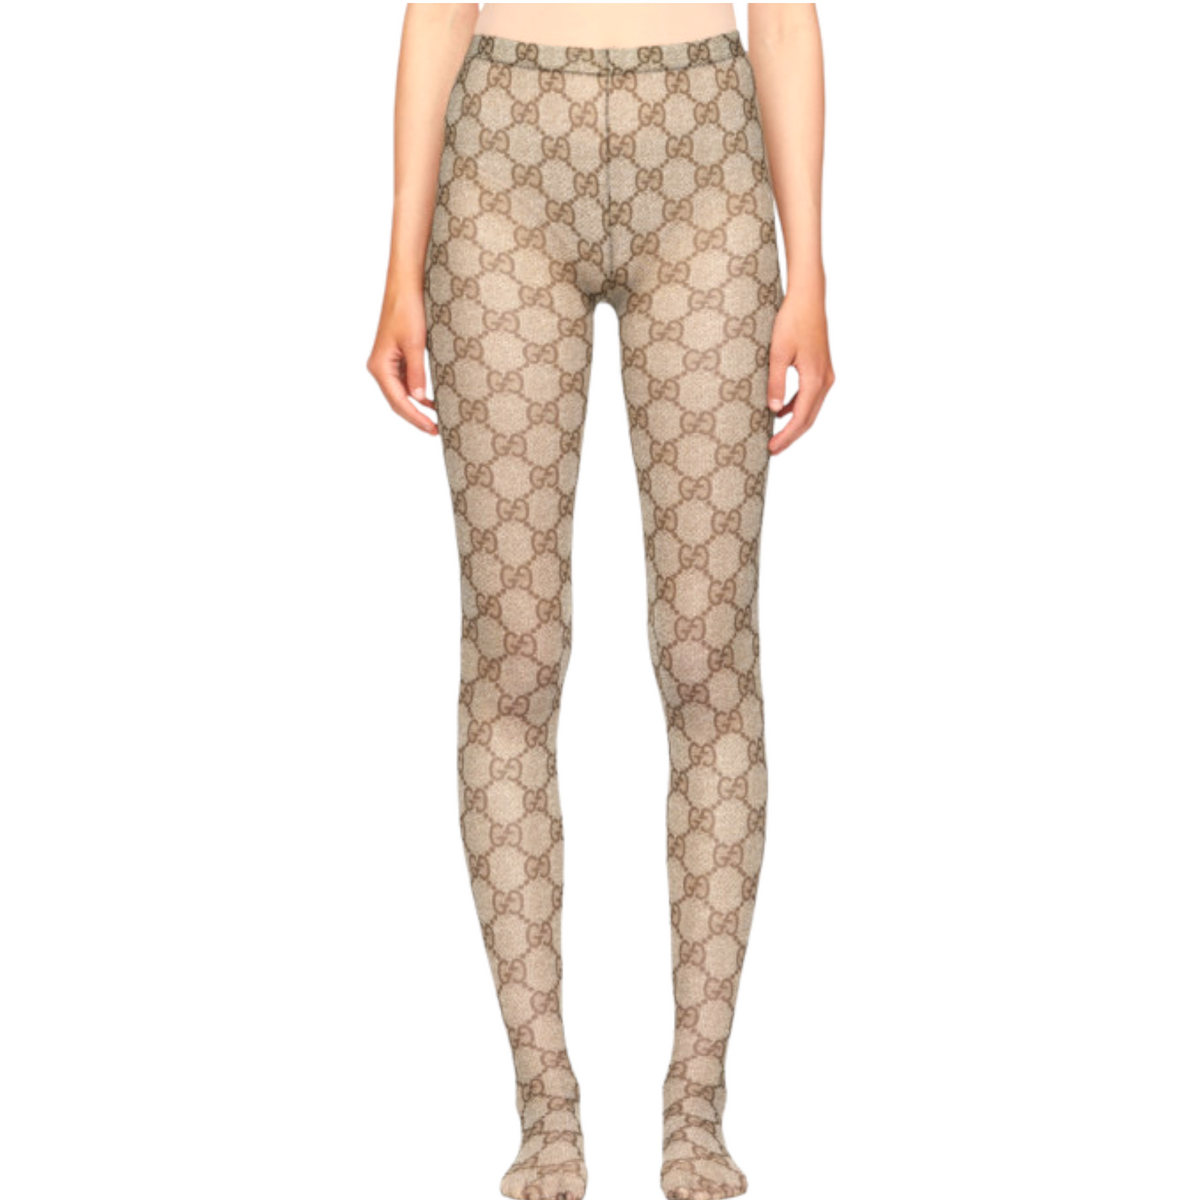 GG Inspired Print Tights- Lightest Brown – Dropashoe